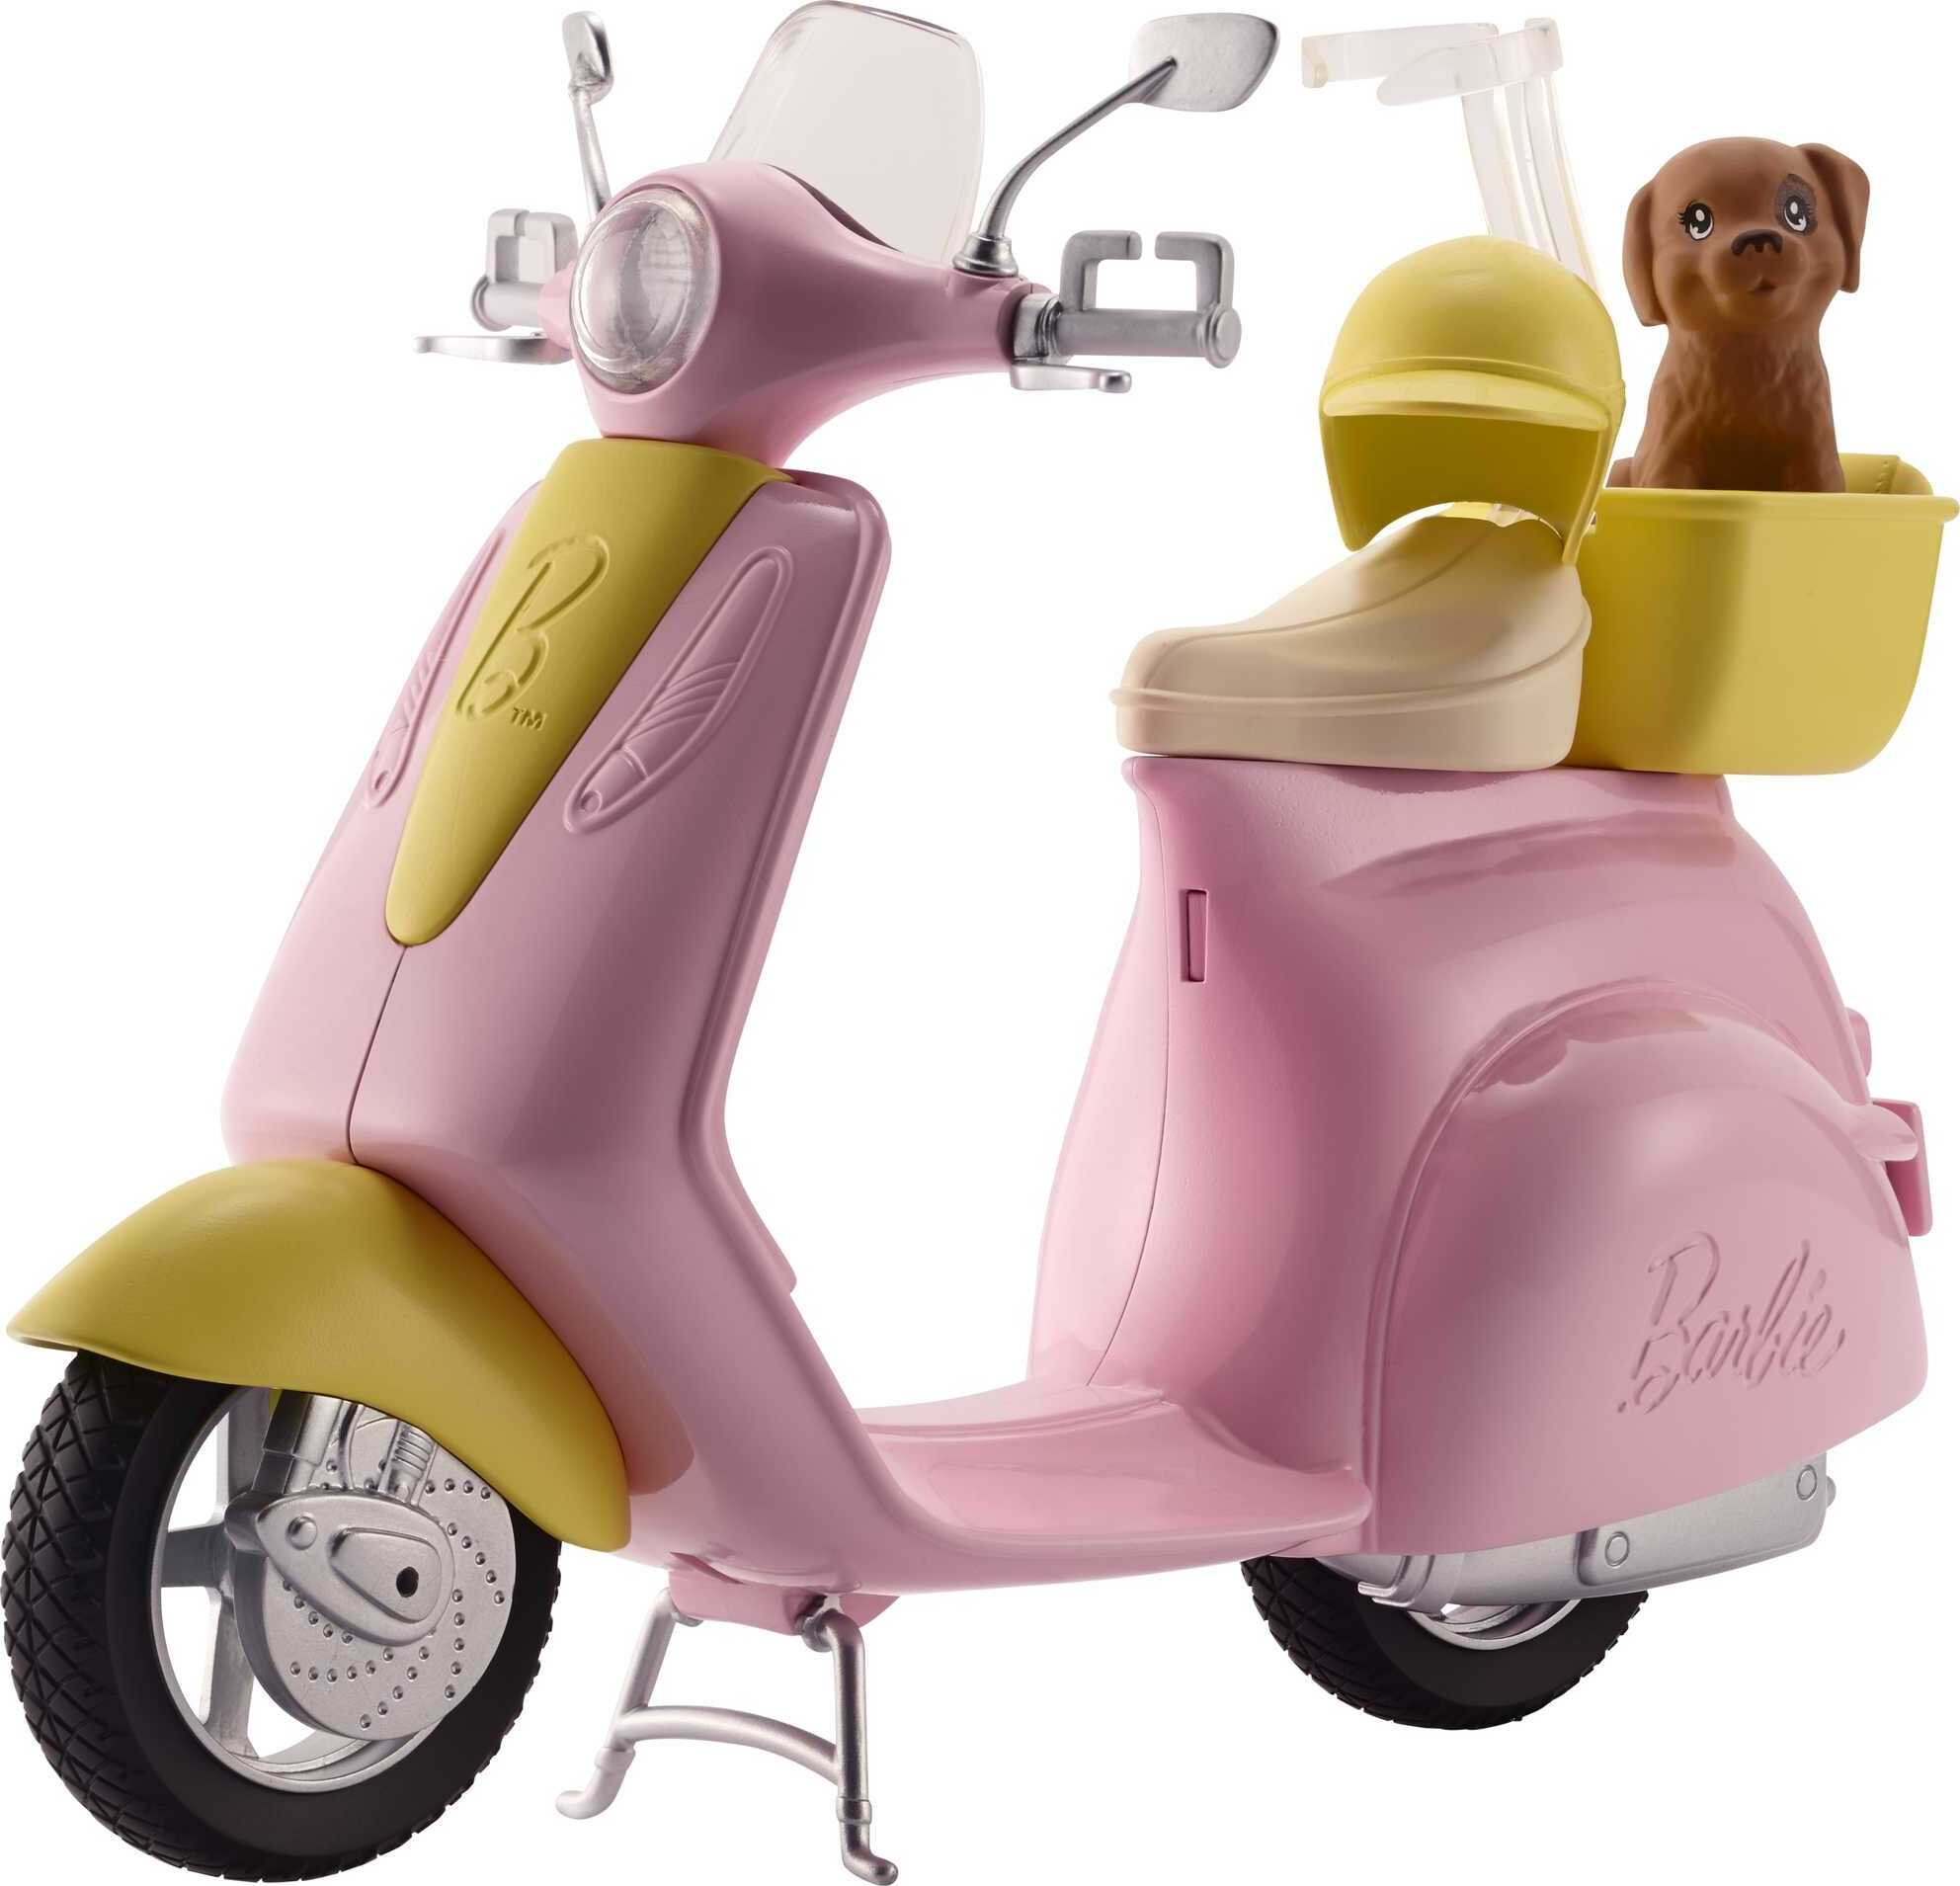 Barbie Pink & Yellow Scooter Moped with Puppy & Helmet - image 1 of 6